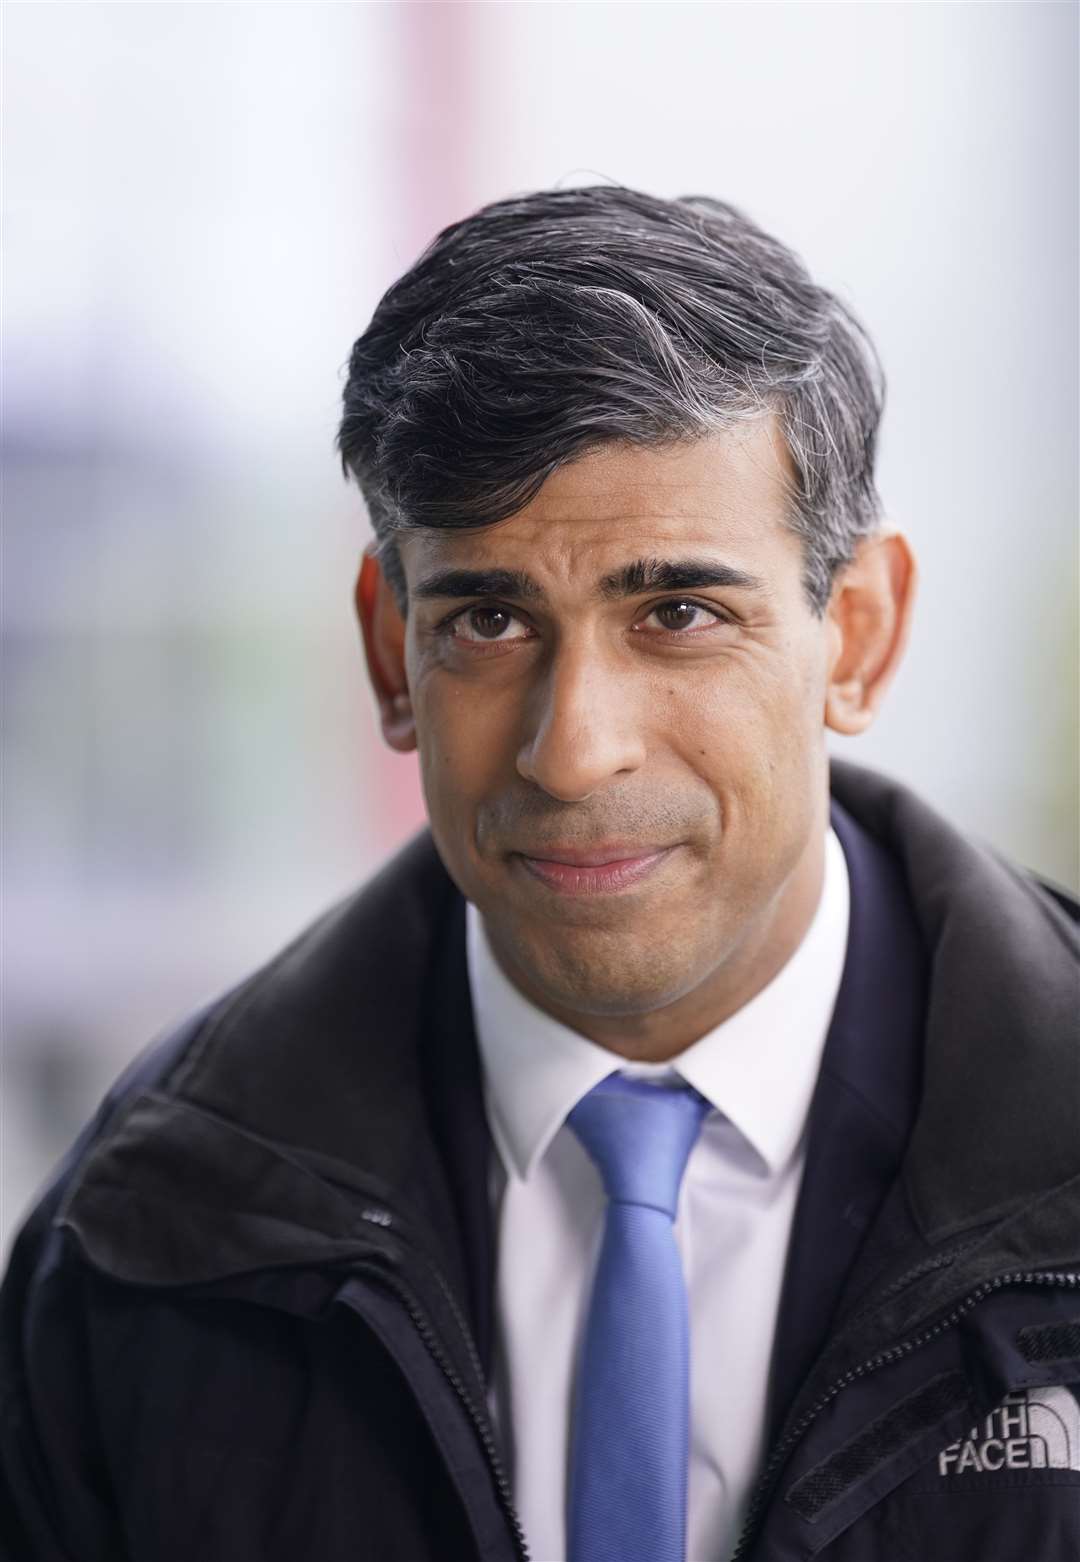 Prime Minister Rishi Sunak faces another tricky by-election after ex-Tory MP Scott Benton’s resignation (Danny Lawson/PA)